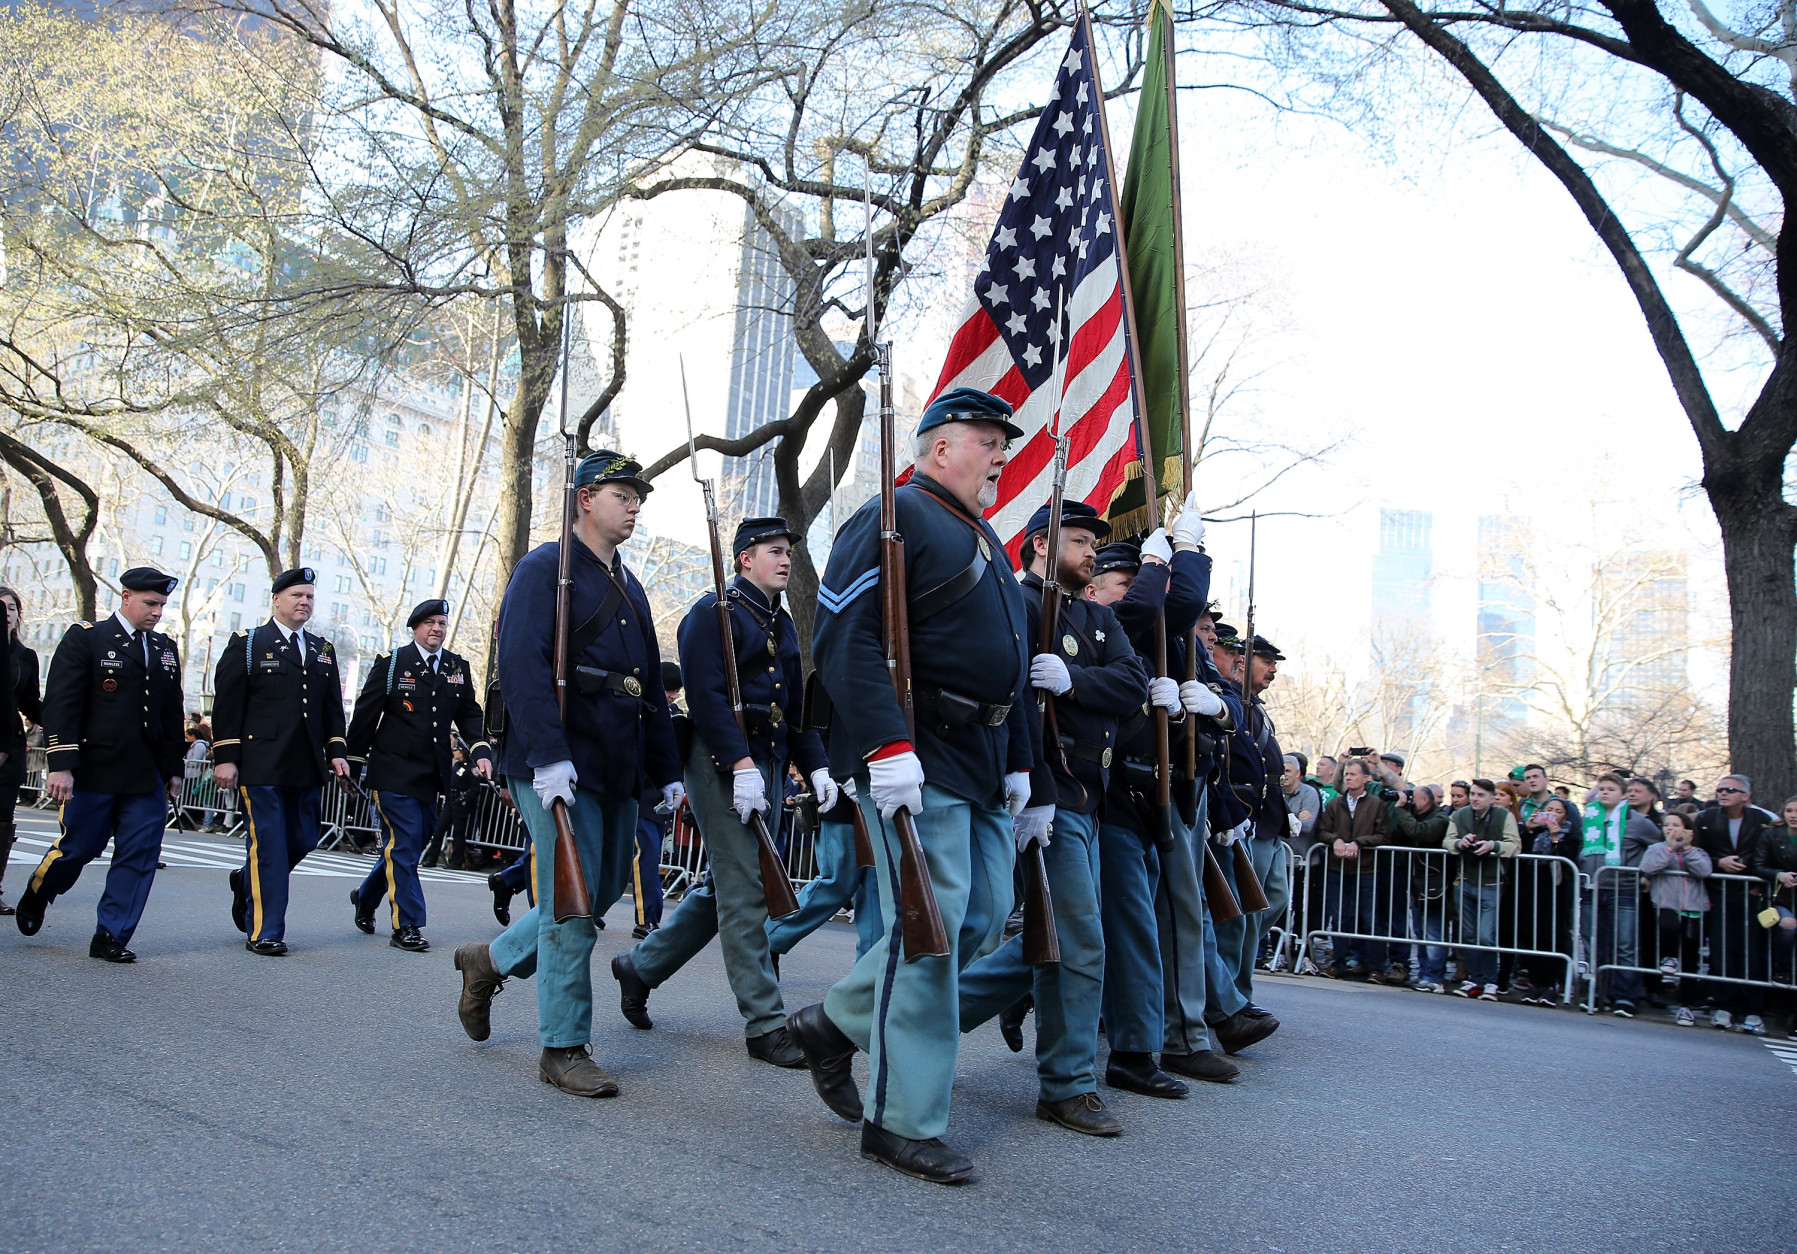 NEW YORK, NY - MARCH 17:  Members of the 69th Infantry Regiment march in the 255th annual St. Patricks Day Parade along Fifth Avenue in New York City on March 17, 2016 in New York City.  (Photo by Jemal Countess/Getty Images)